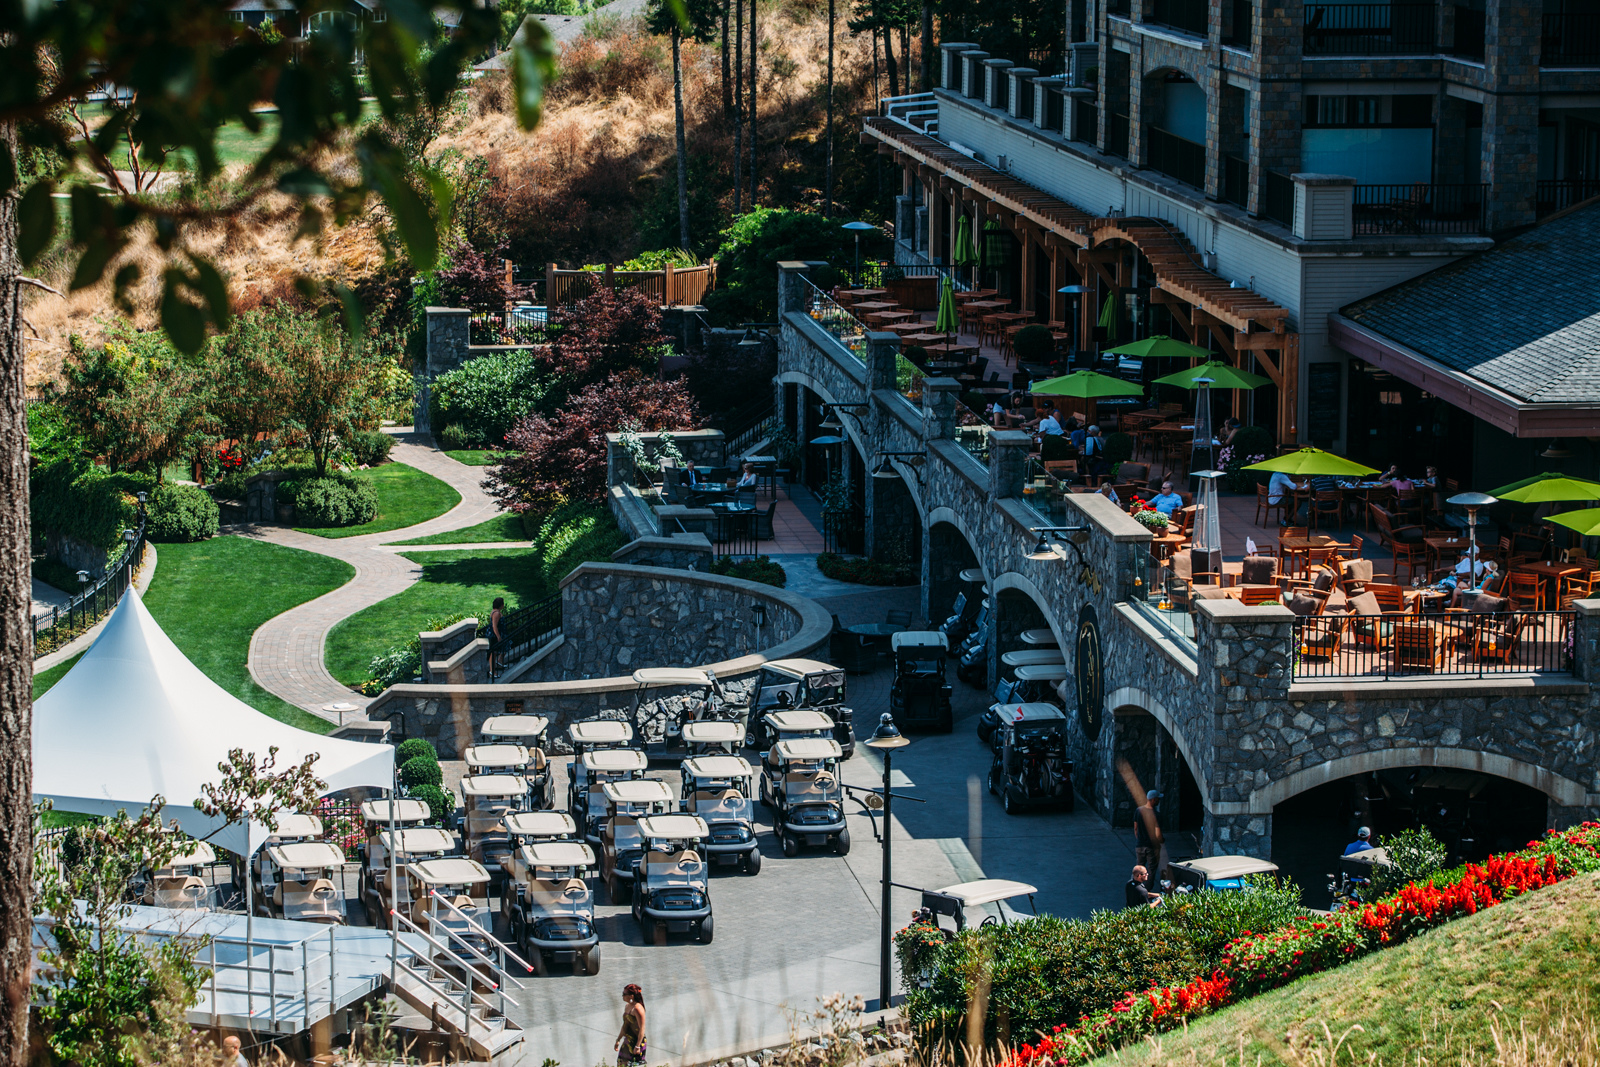 World Class accommodation here at the Bear Mountain Resort for the 2015 BearTrax Event (formerly Jumpship). Grab a drink and bite to eat on the fabulous outdoor patio and enjoy the surrounding view.